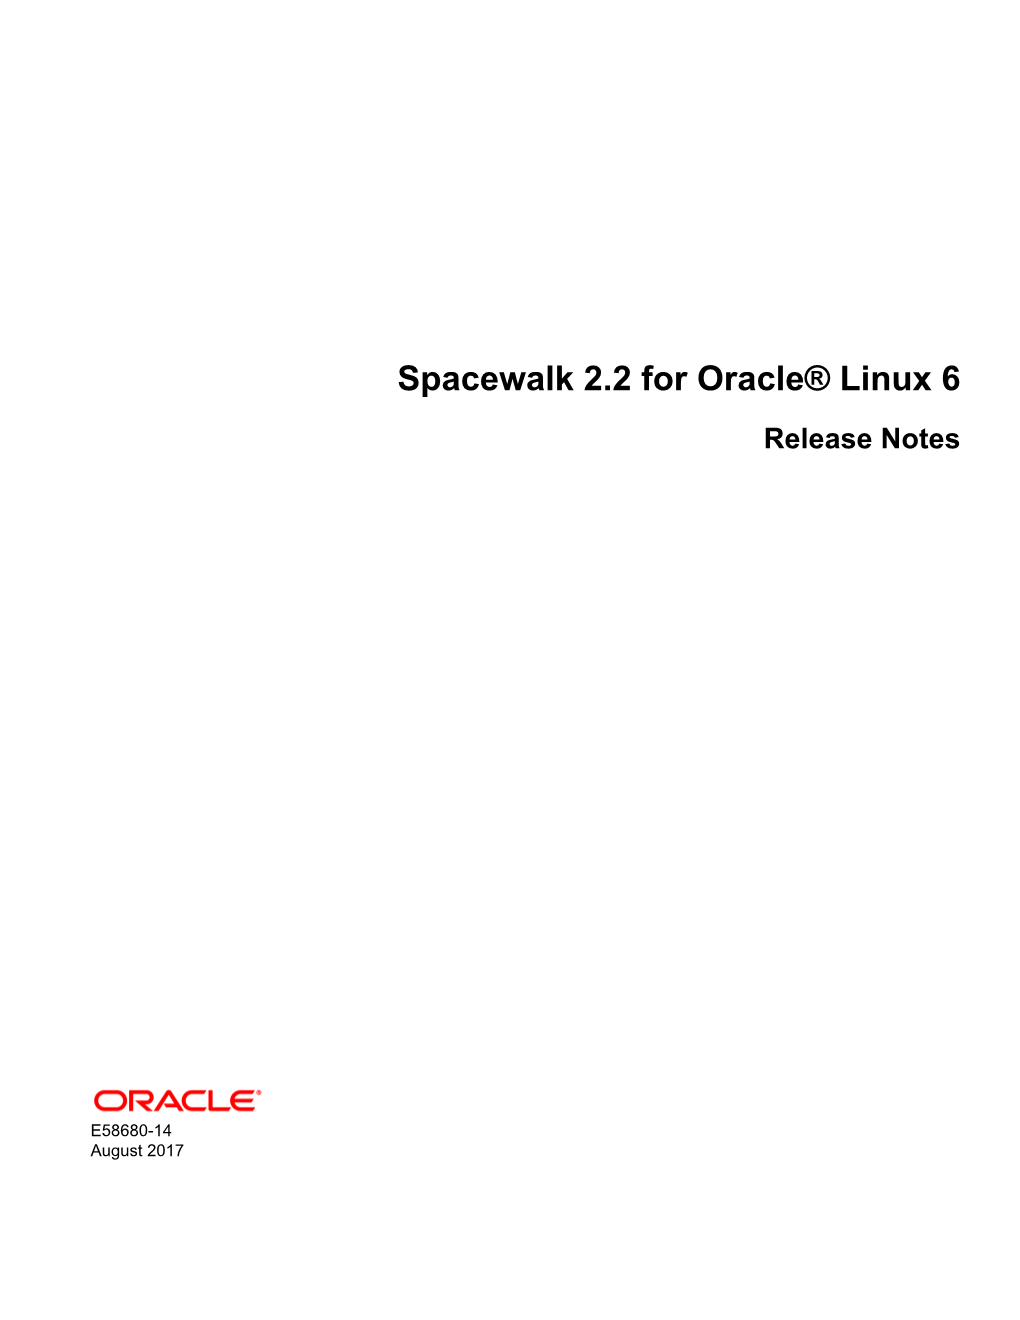 Spacewalk 2.2 for Oracle® Linux 6 Release Notes